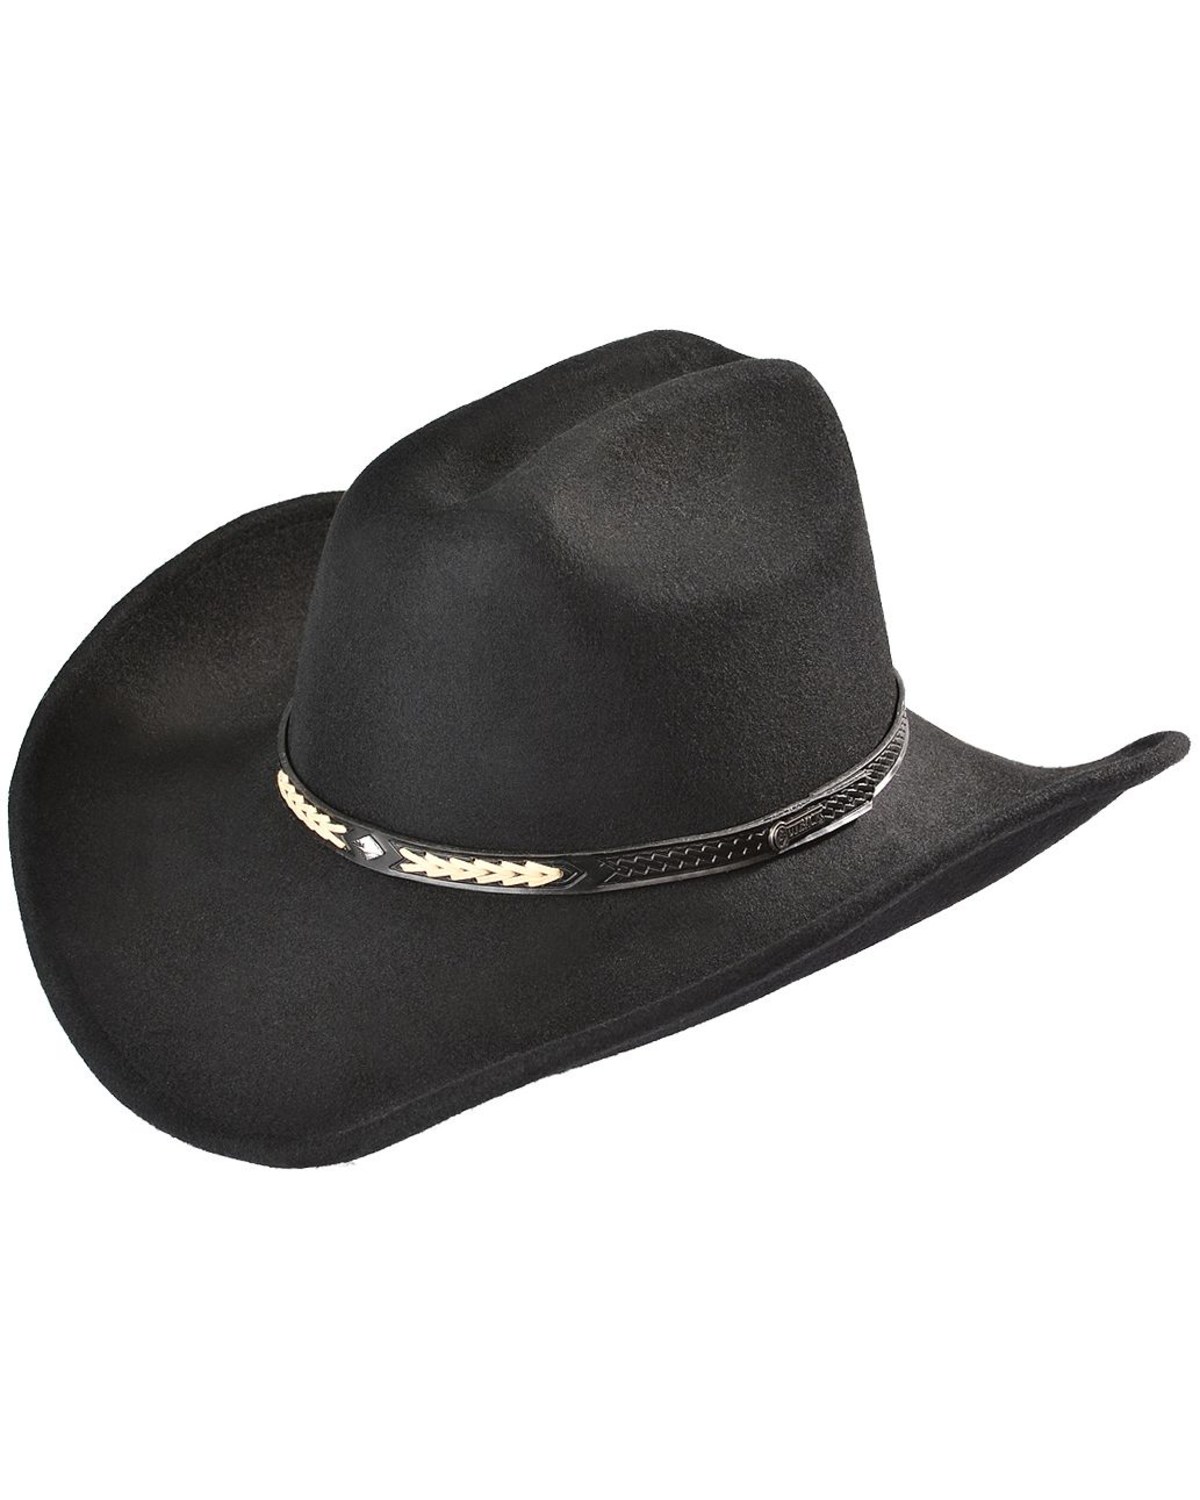 Outback Trading Co. Out Of The Chute UPF 50 Sun Protection Crushable Felt Cowboy Hat